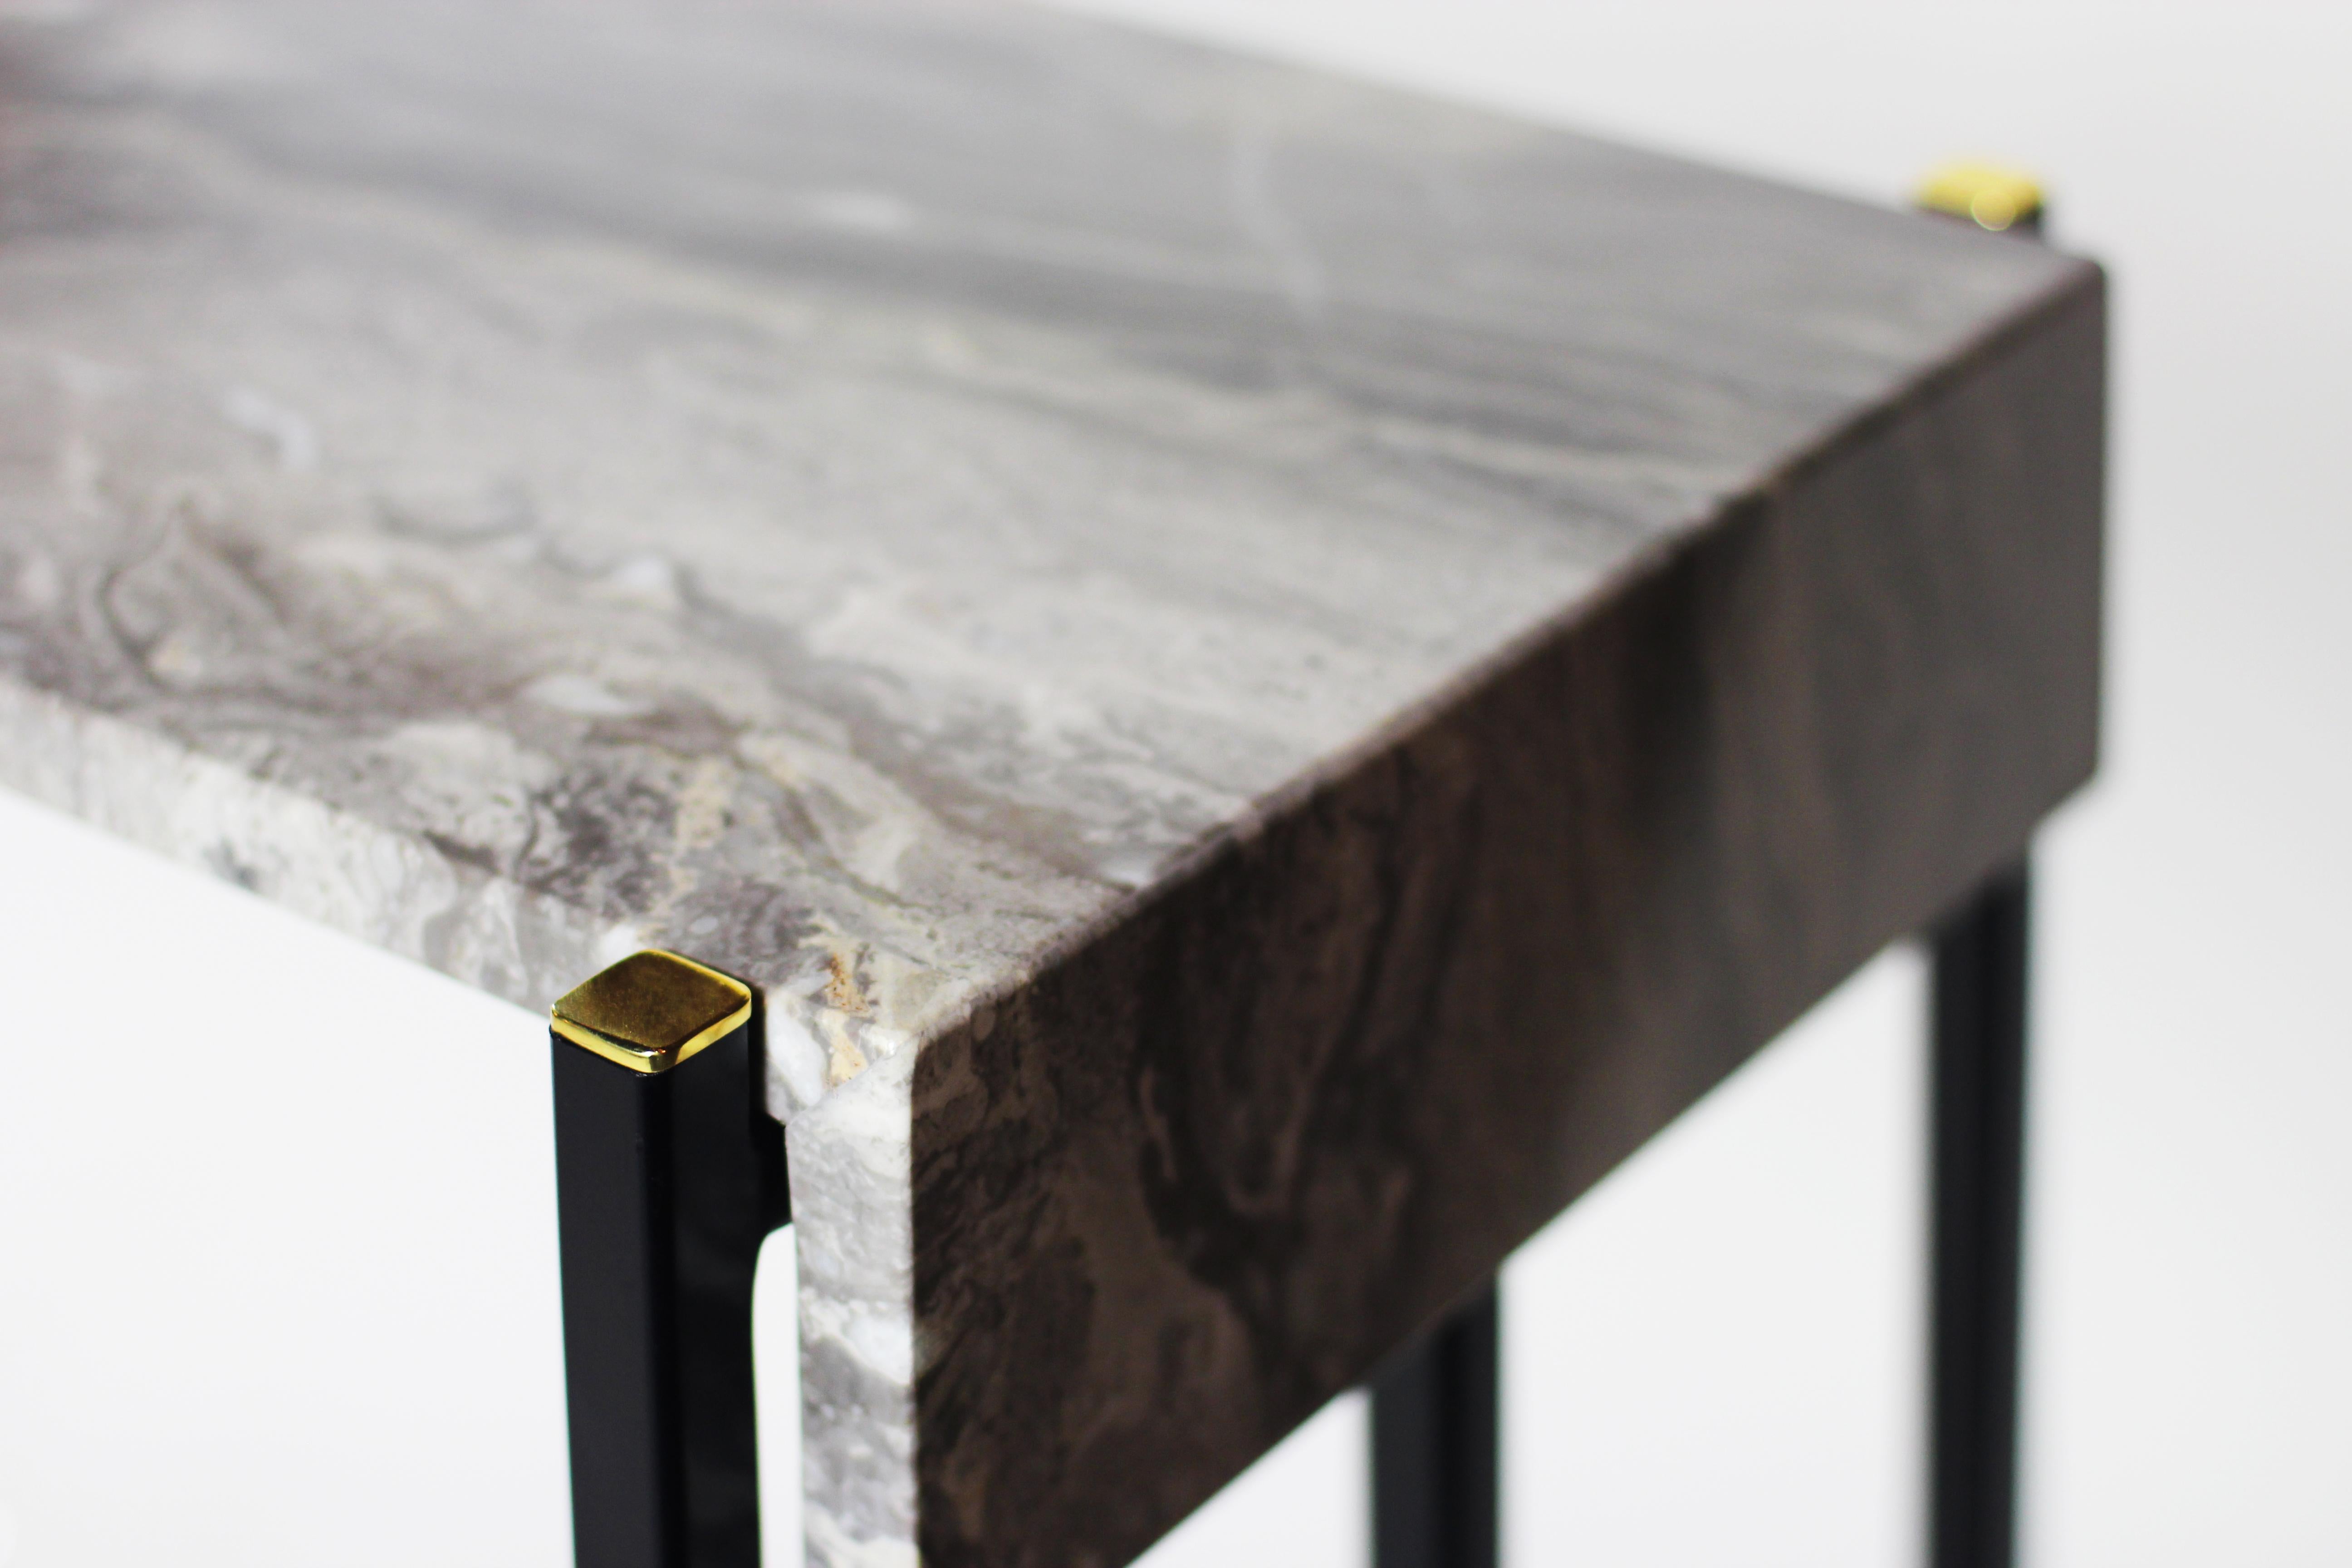 The (wh)ORE HAüS STUDIOS Jeffery console table is made of blackened steel, marble and brass accents. This table is made to order and can, therefore, be customized. As pictured, blackened steel, unlacquered brushed brass lashings, and